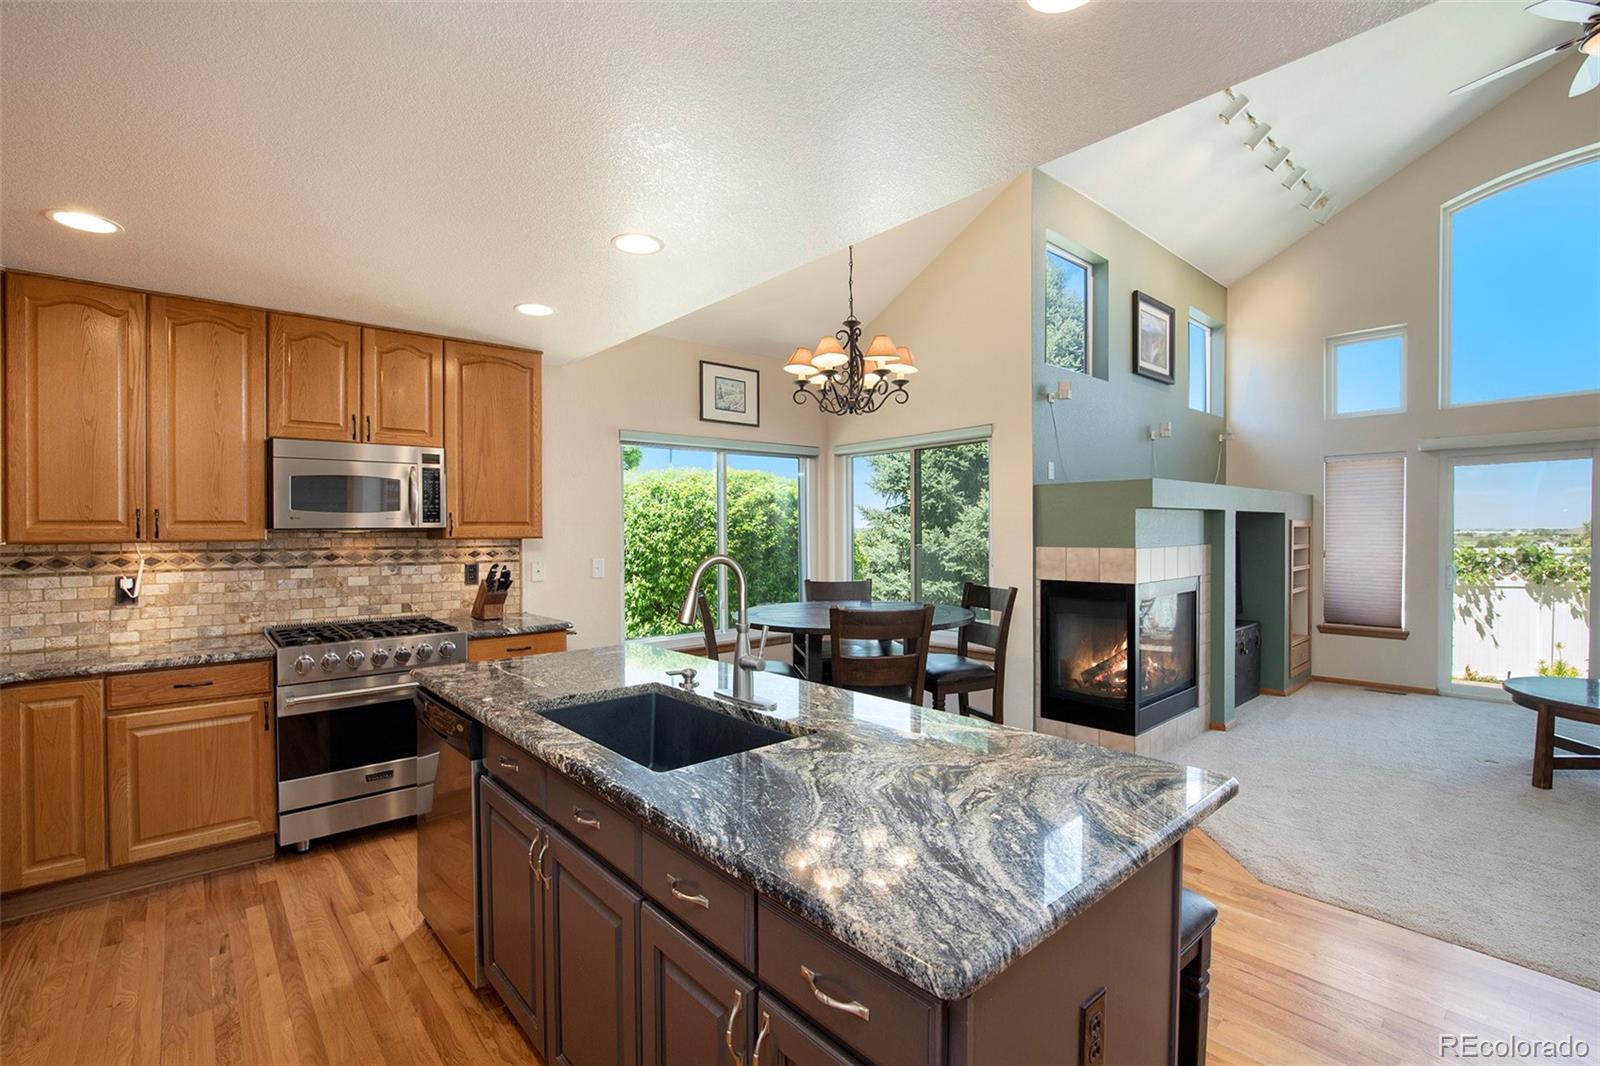 a kitchen with granite countertop a sink dishwasher stove and oven with wooden floor